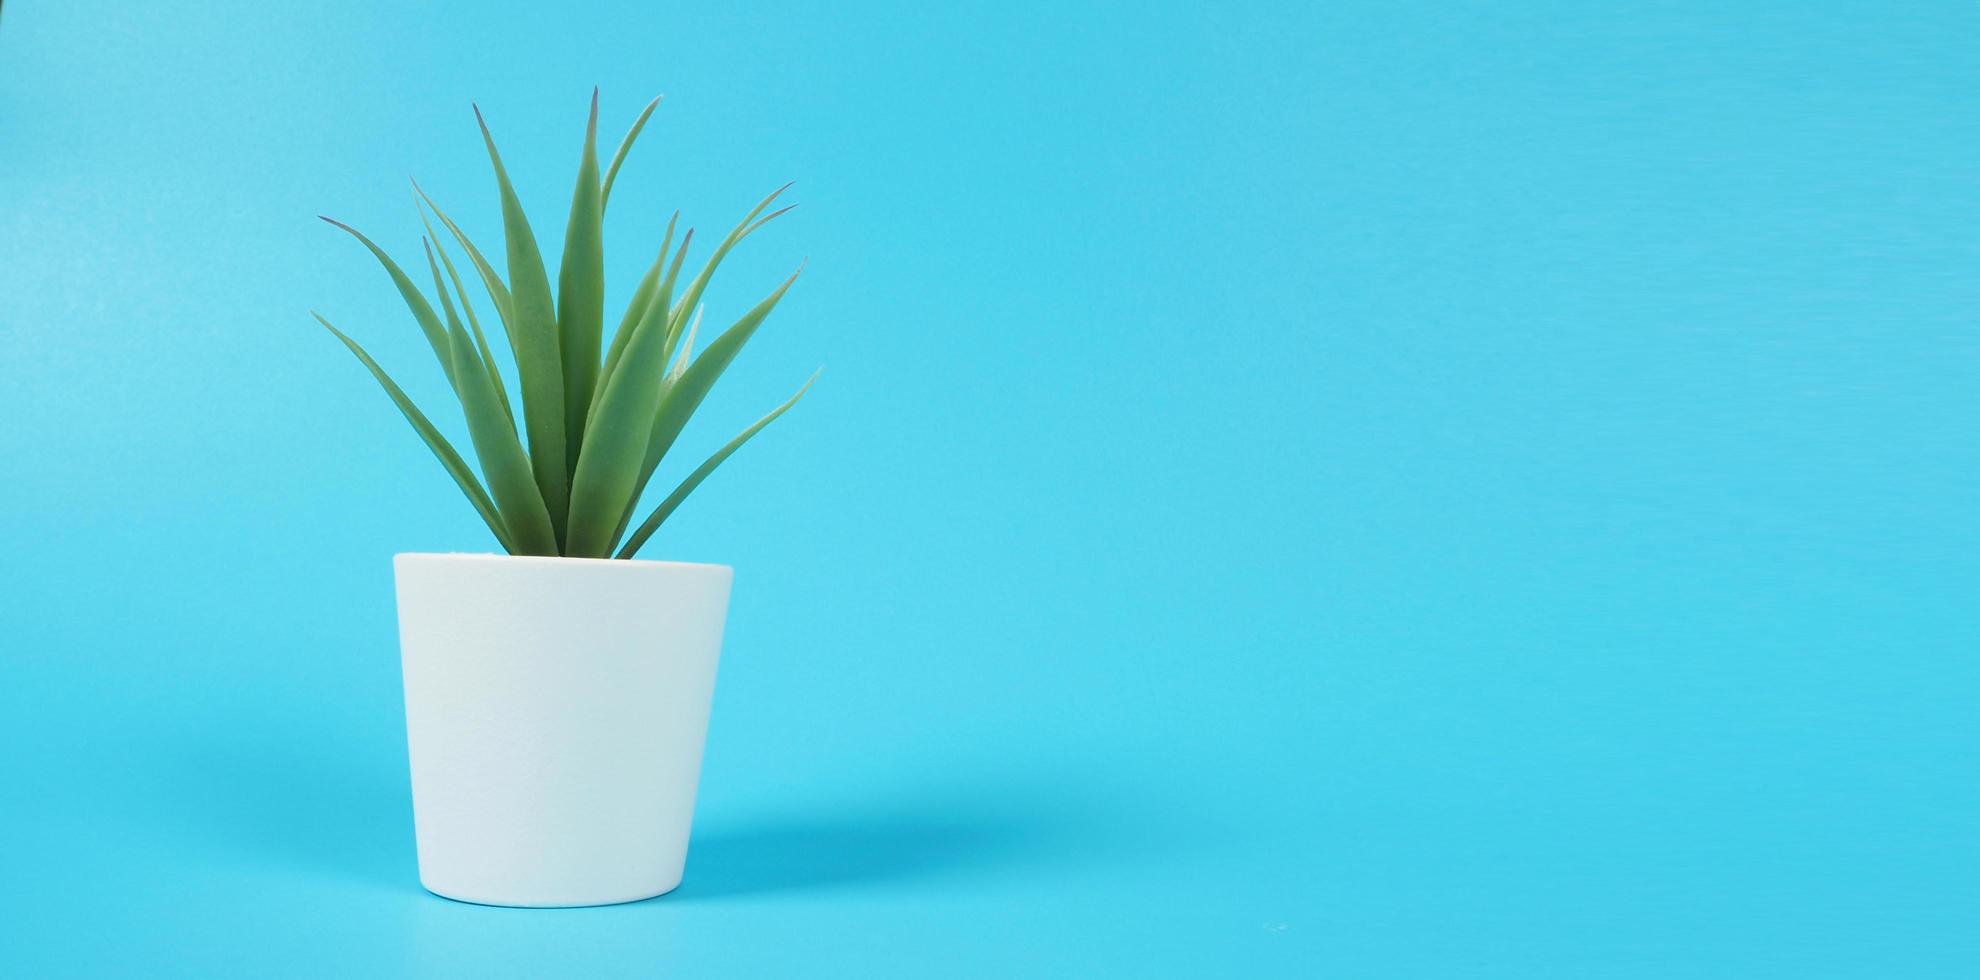 Artificial cactus plants or plastic or fake tree on blue background.it is isolated photo